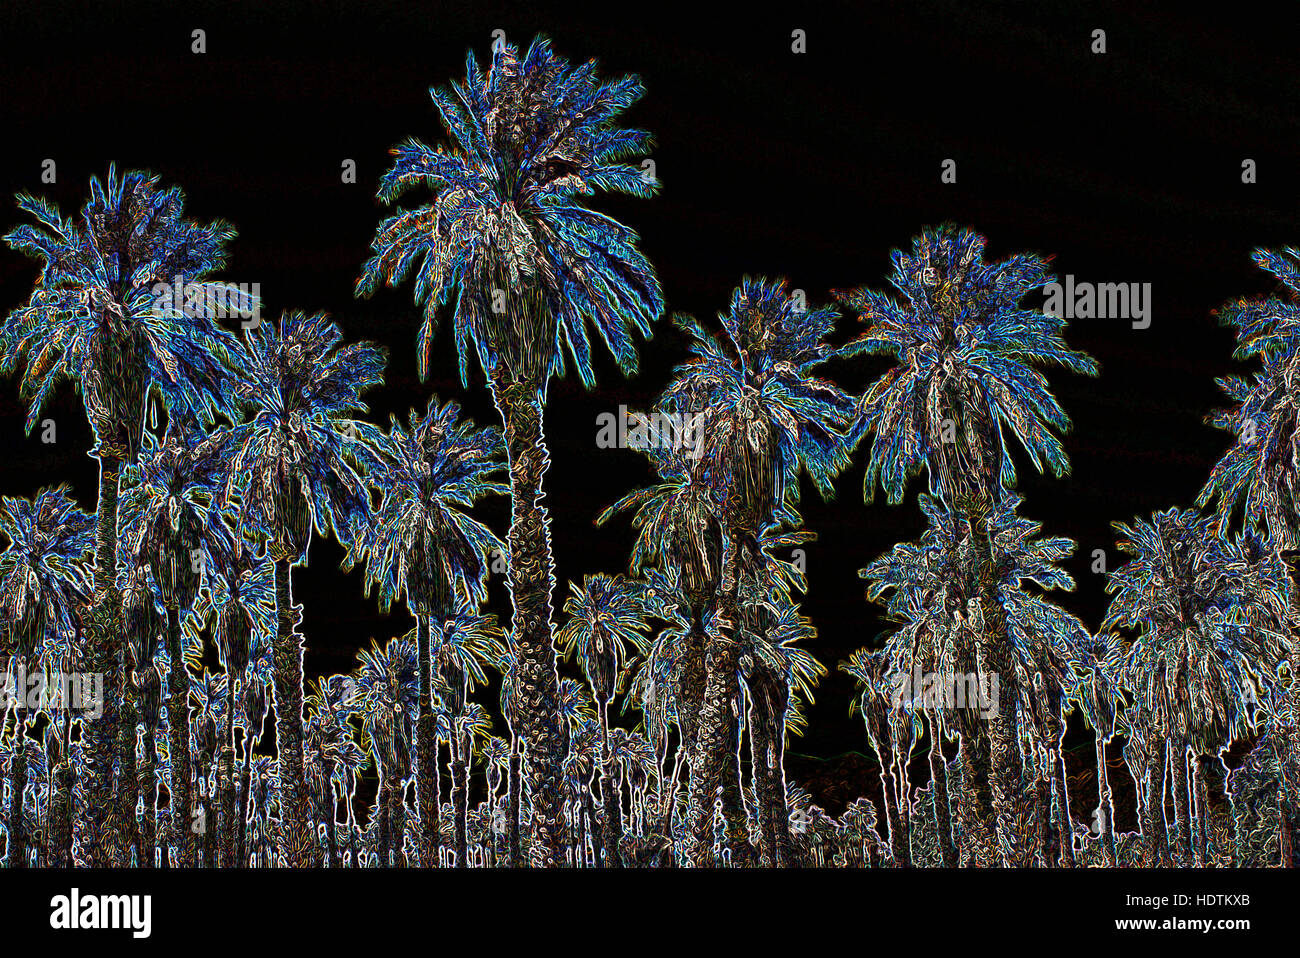 Palm Trees (Arecaceae or Palmae) - Digitally Manipulated Image with Glowing Edges, Abstract Forest on a Black Background Stock Photo